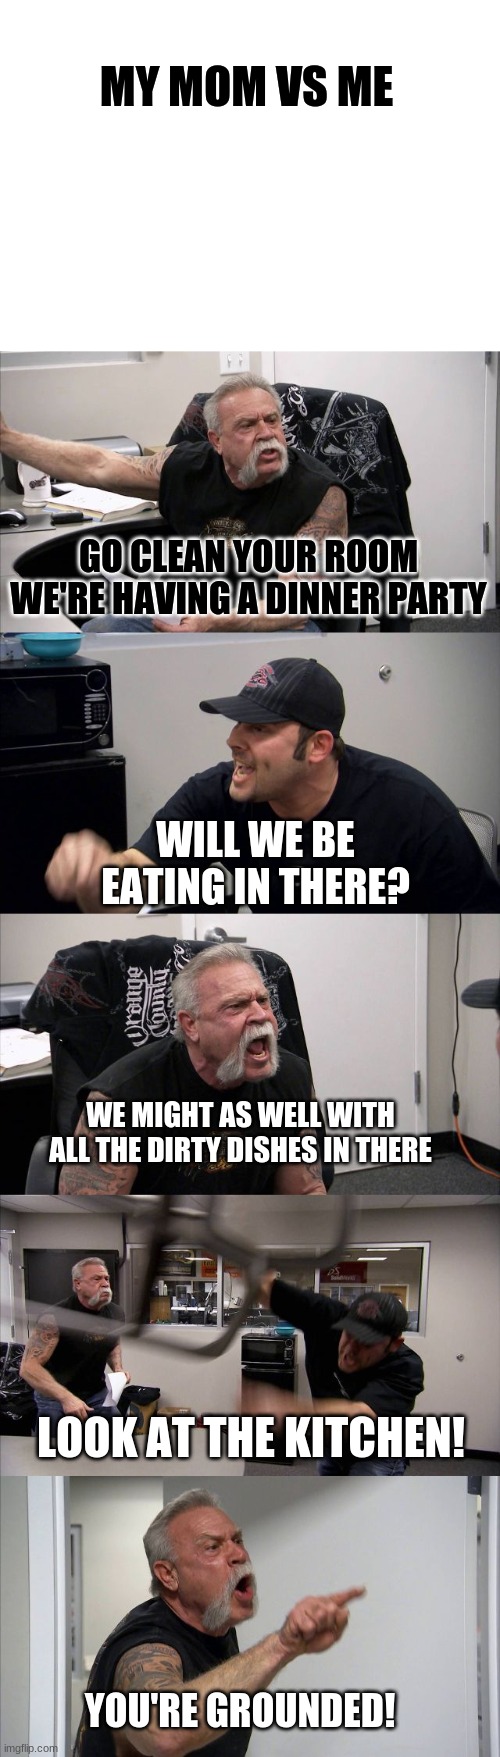 American Chopper Argument |  MY MOM VS ME; GO CLEAN YOUR ROOM WE'RE HAVING A DINNER PARTY; WILL WE BE EATING IN THERE? WE MIGHT AS WELL WITH ALL THE DIRTY DISHES IN THERE; LOOK AT THE KITCHEN! YOU'RE GROUNDED! | image tagged in memes,american chopper argument | made w/ Imgflip meme maker